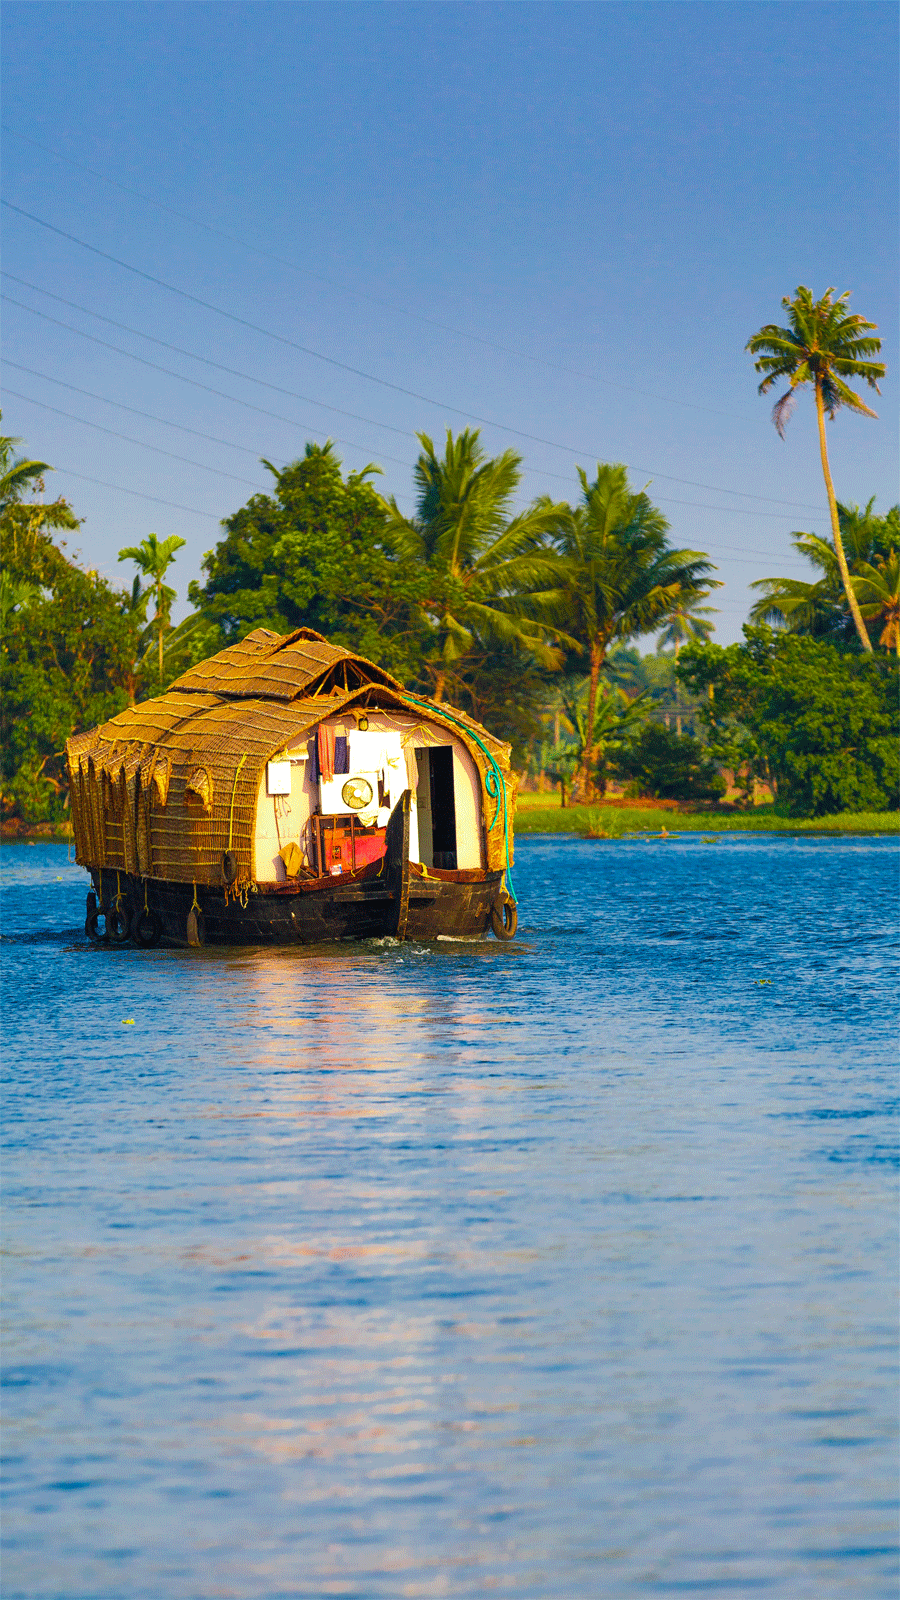 Holidaying in Kerala: Where to go in God's own country, costs